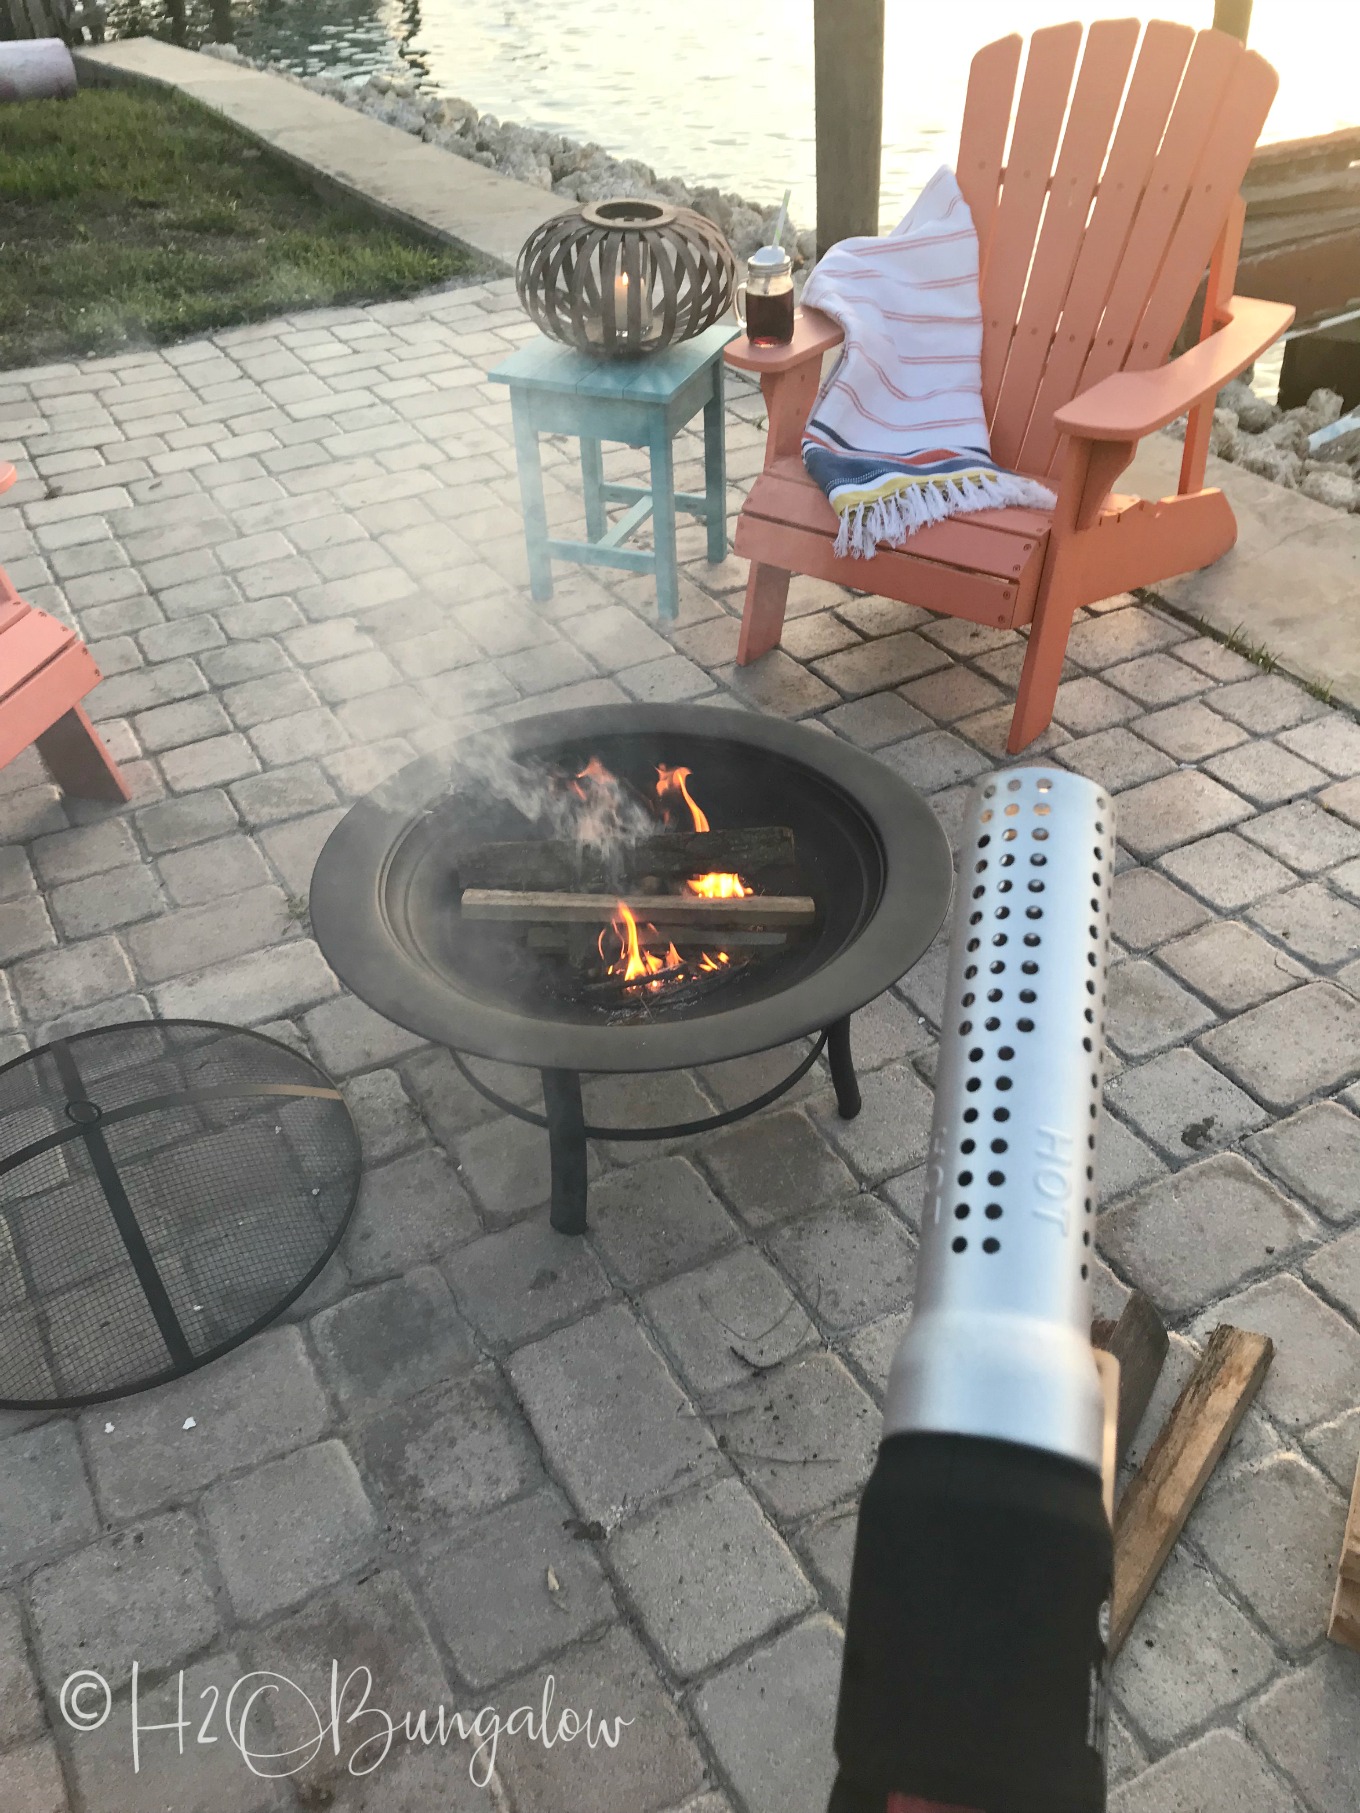 Fire Pit Tips And Tricks You Probably, How To Start A Fire In A Fire Pit